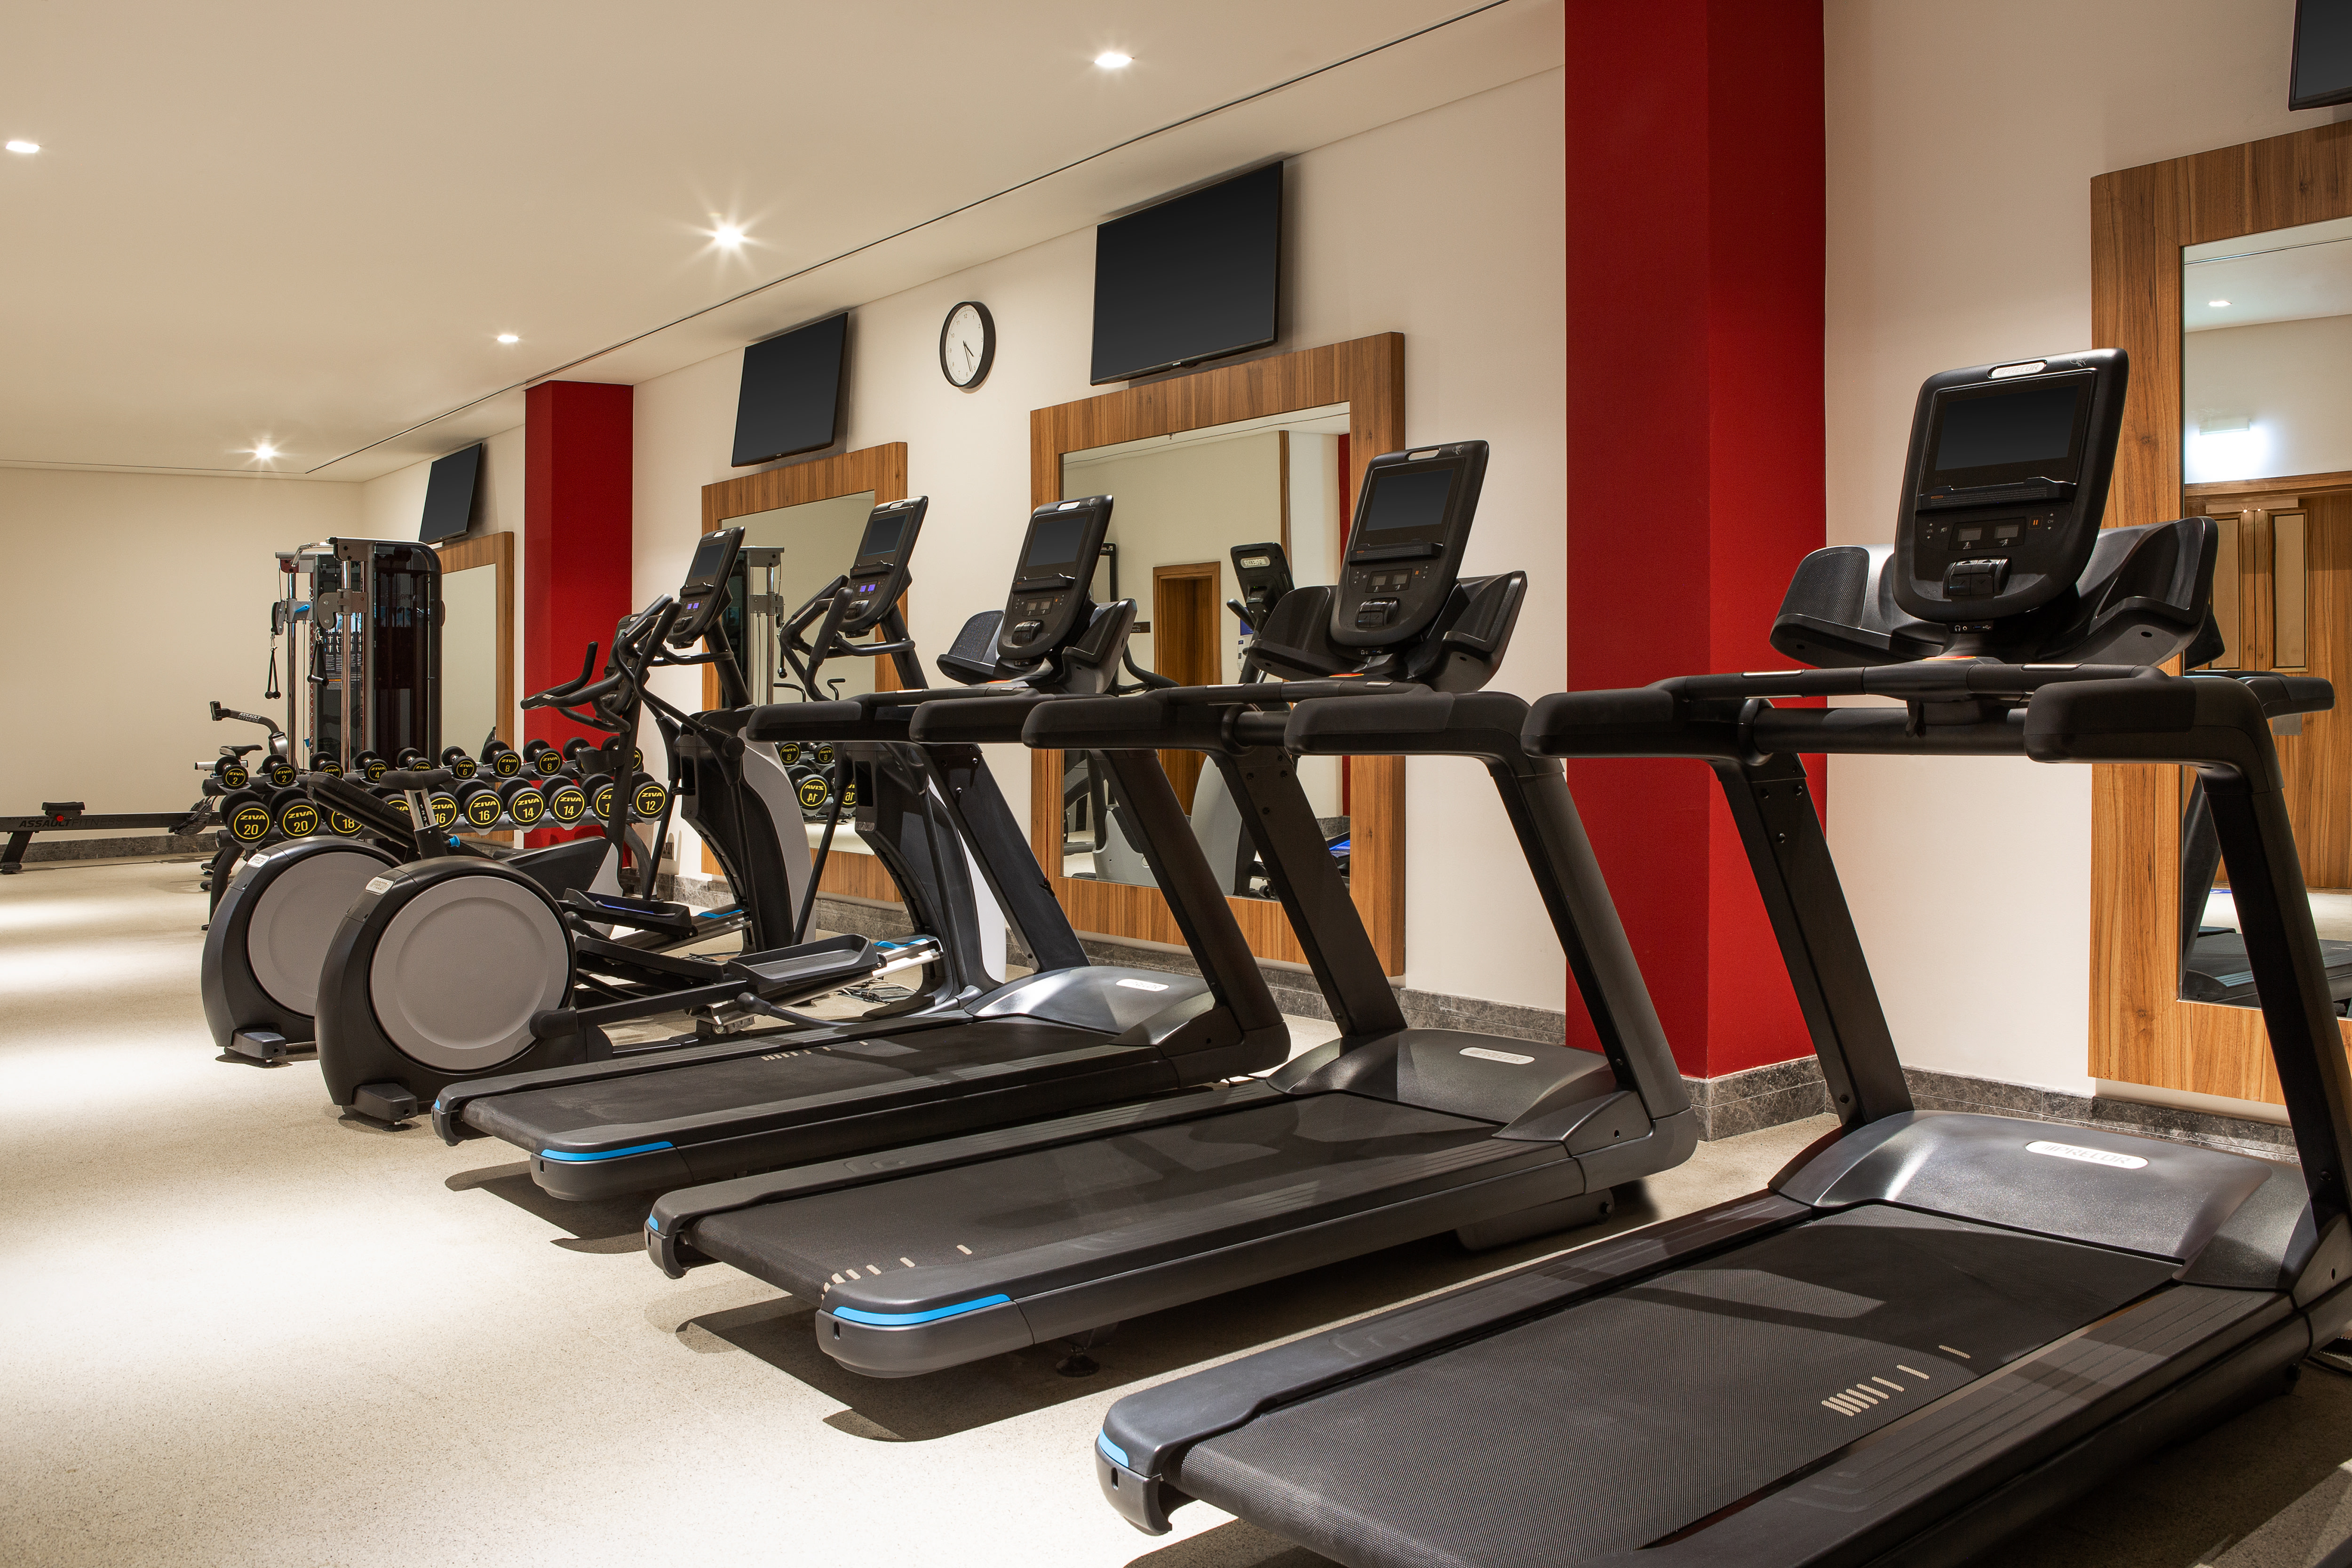 Gym treadmills and cross-country fitness equipment